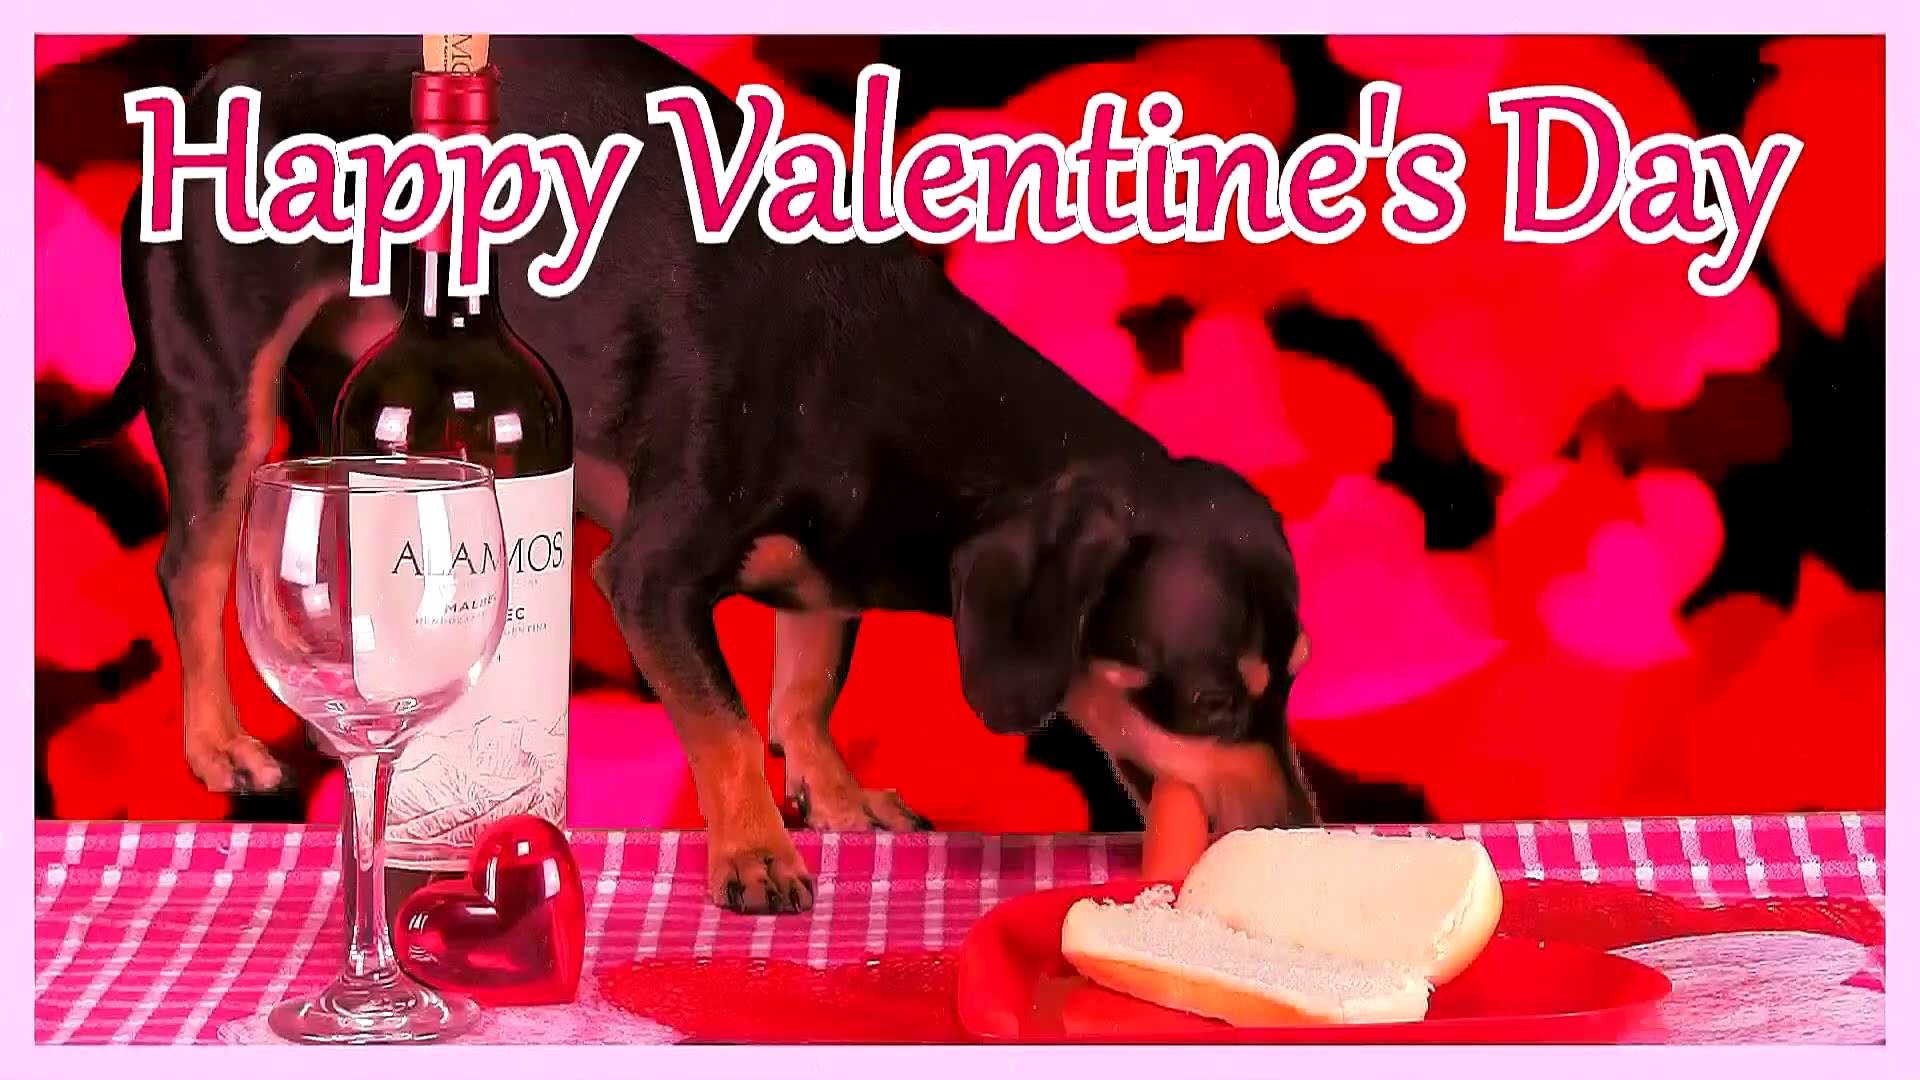 Happy Valentine's Day! Cute Puppy Eats a Hot Dog!